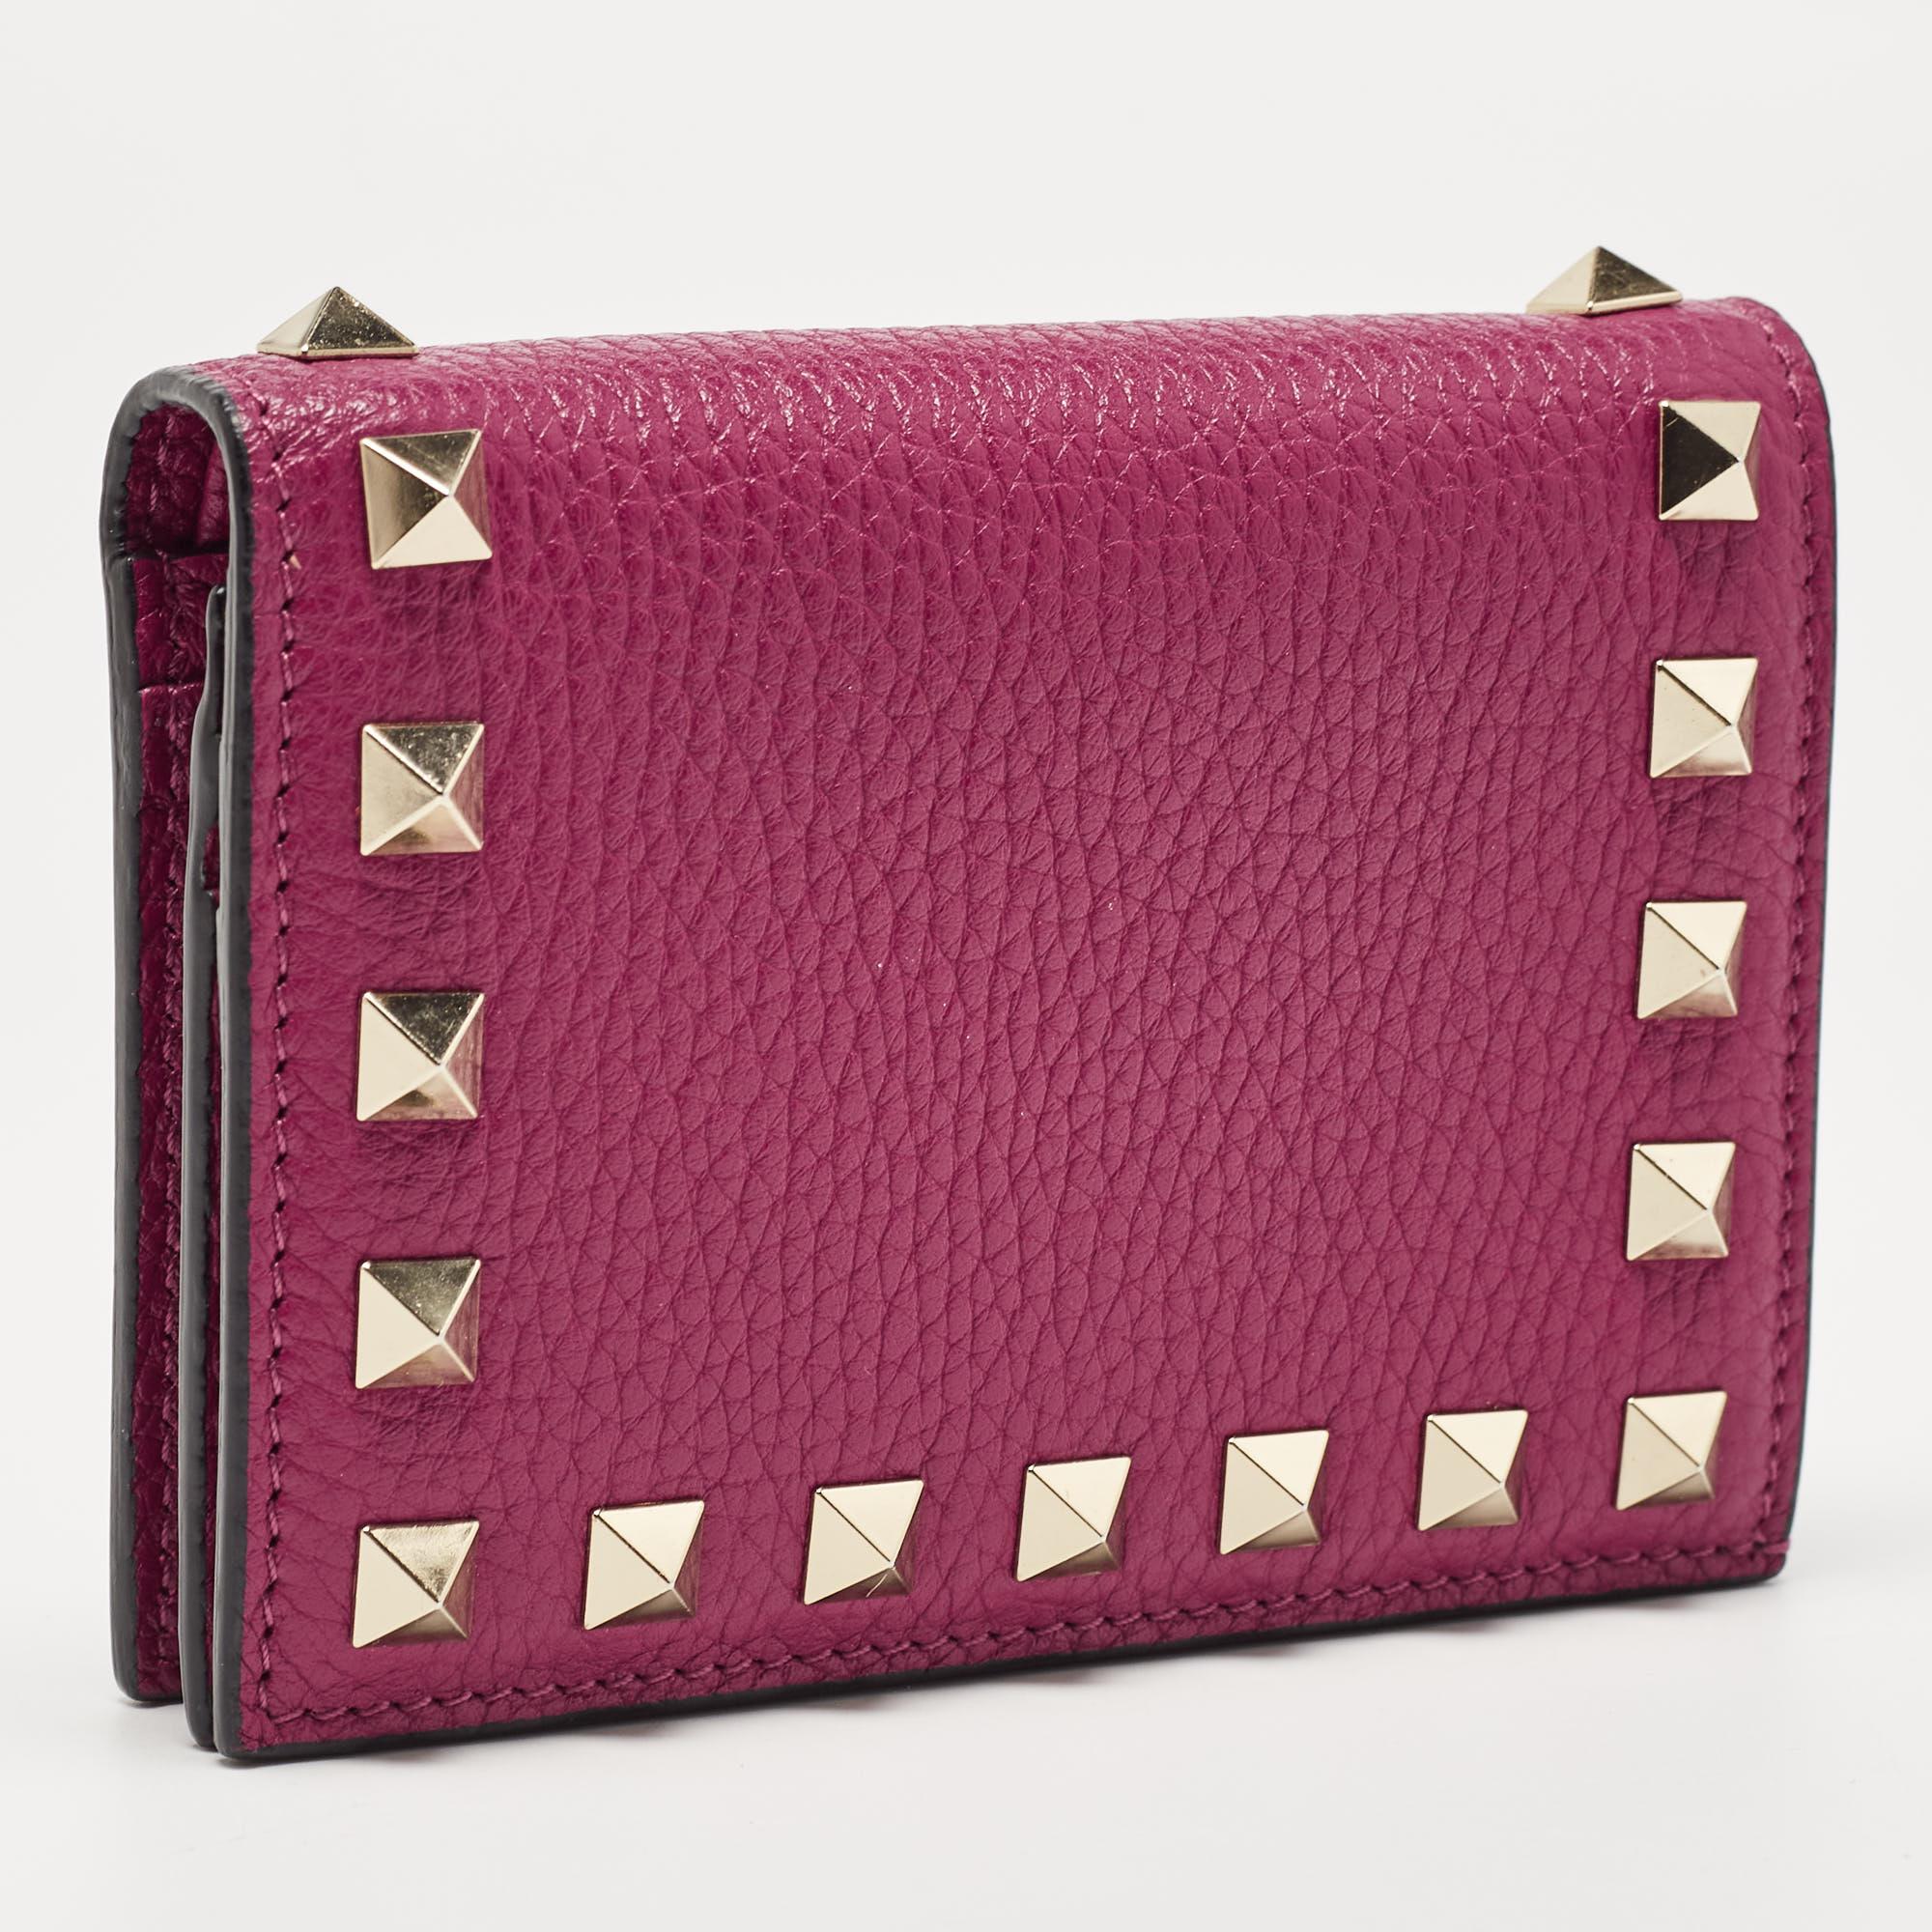 Valentino Magenta Leather Rockstud Flap Compact Wallet For Sale 6